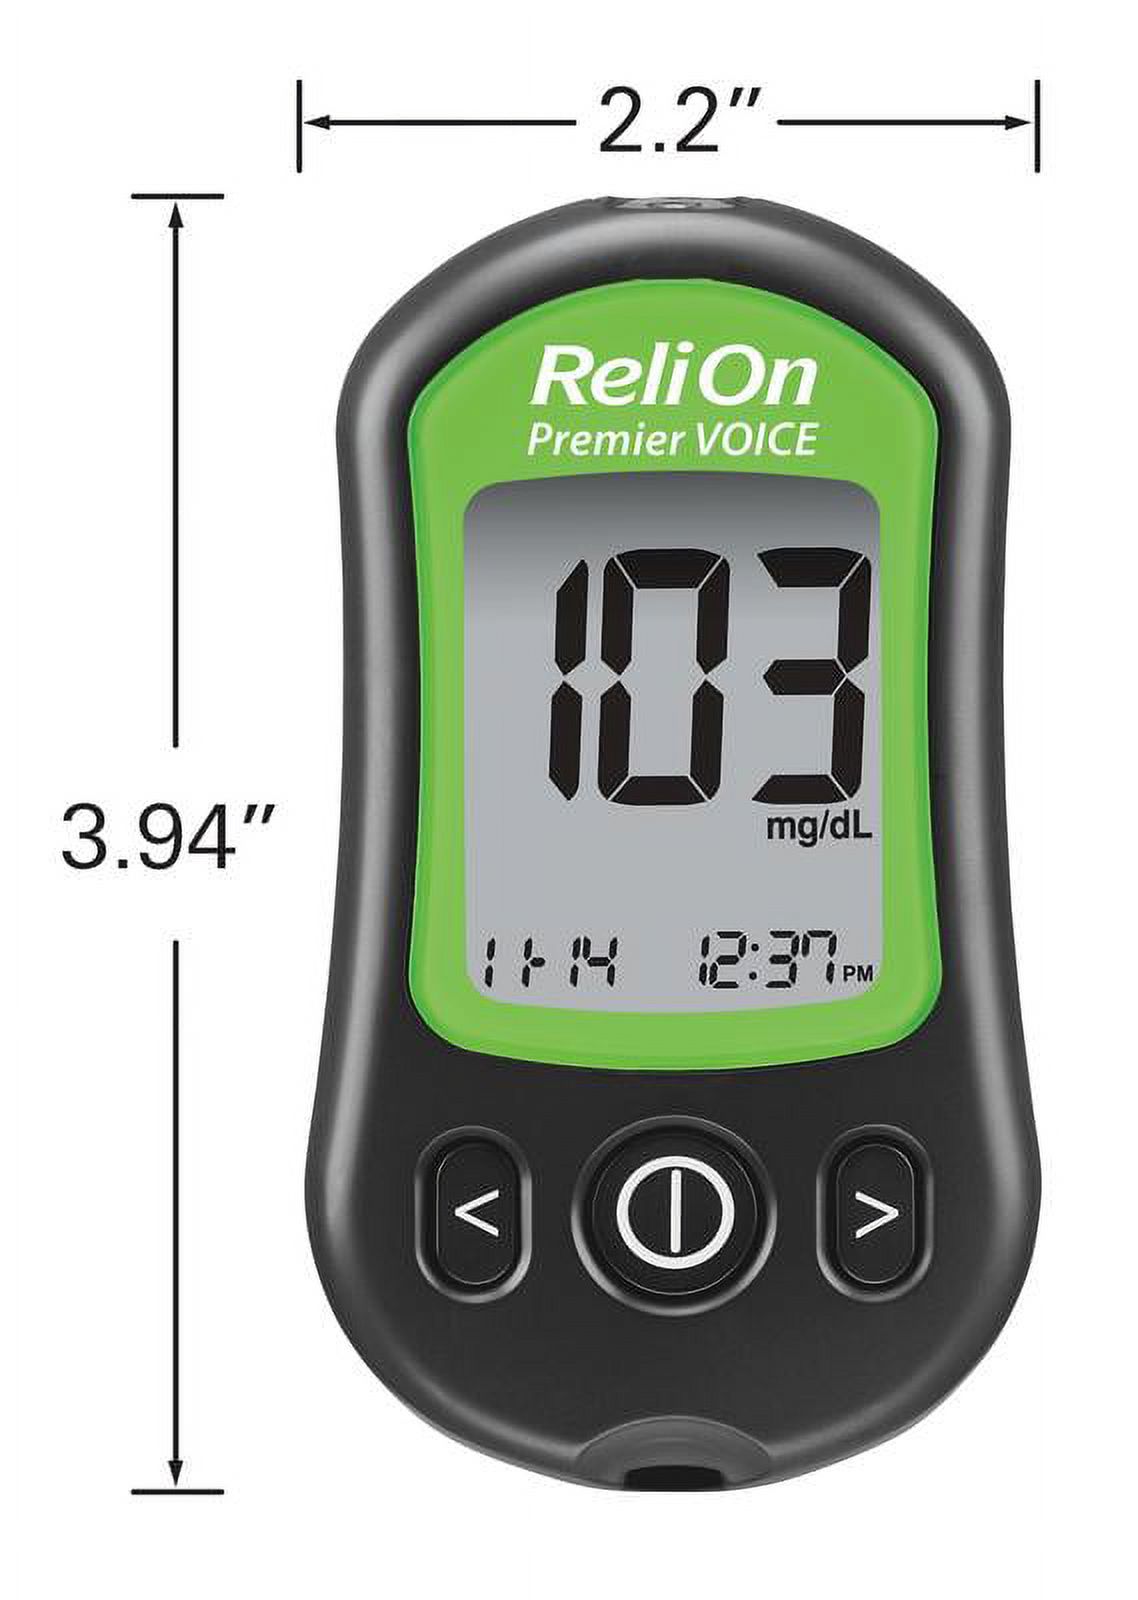 ReliOn Premier VOICE Blood Glucose Monitoring System - image 2 of 8